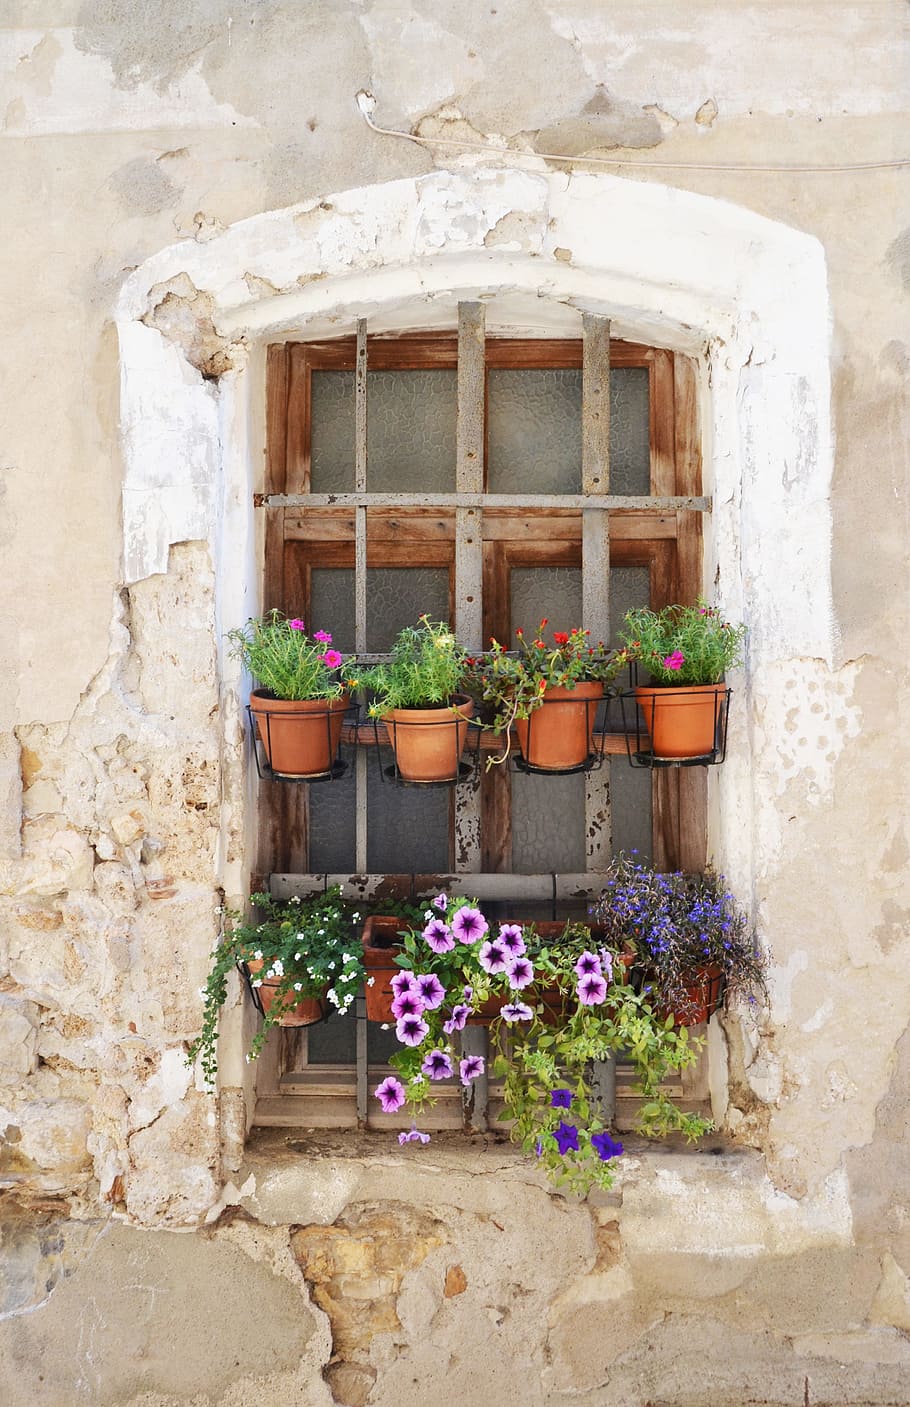 window, flowers, former, france, architecture, old house, house facade, heritage, old houses, mediterranean house